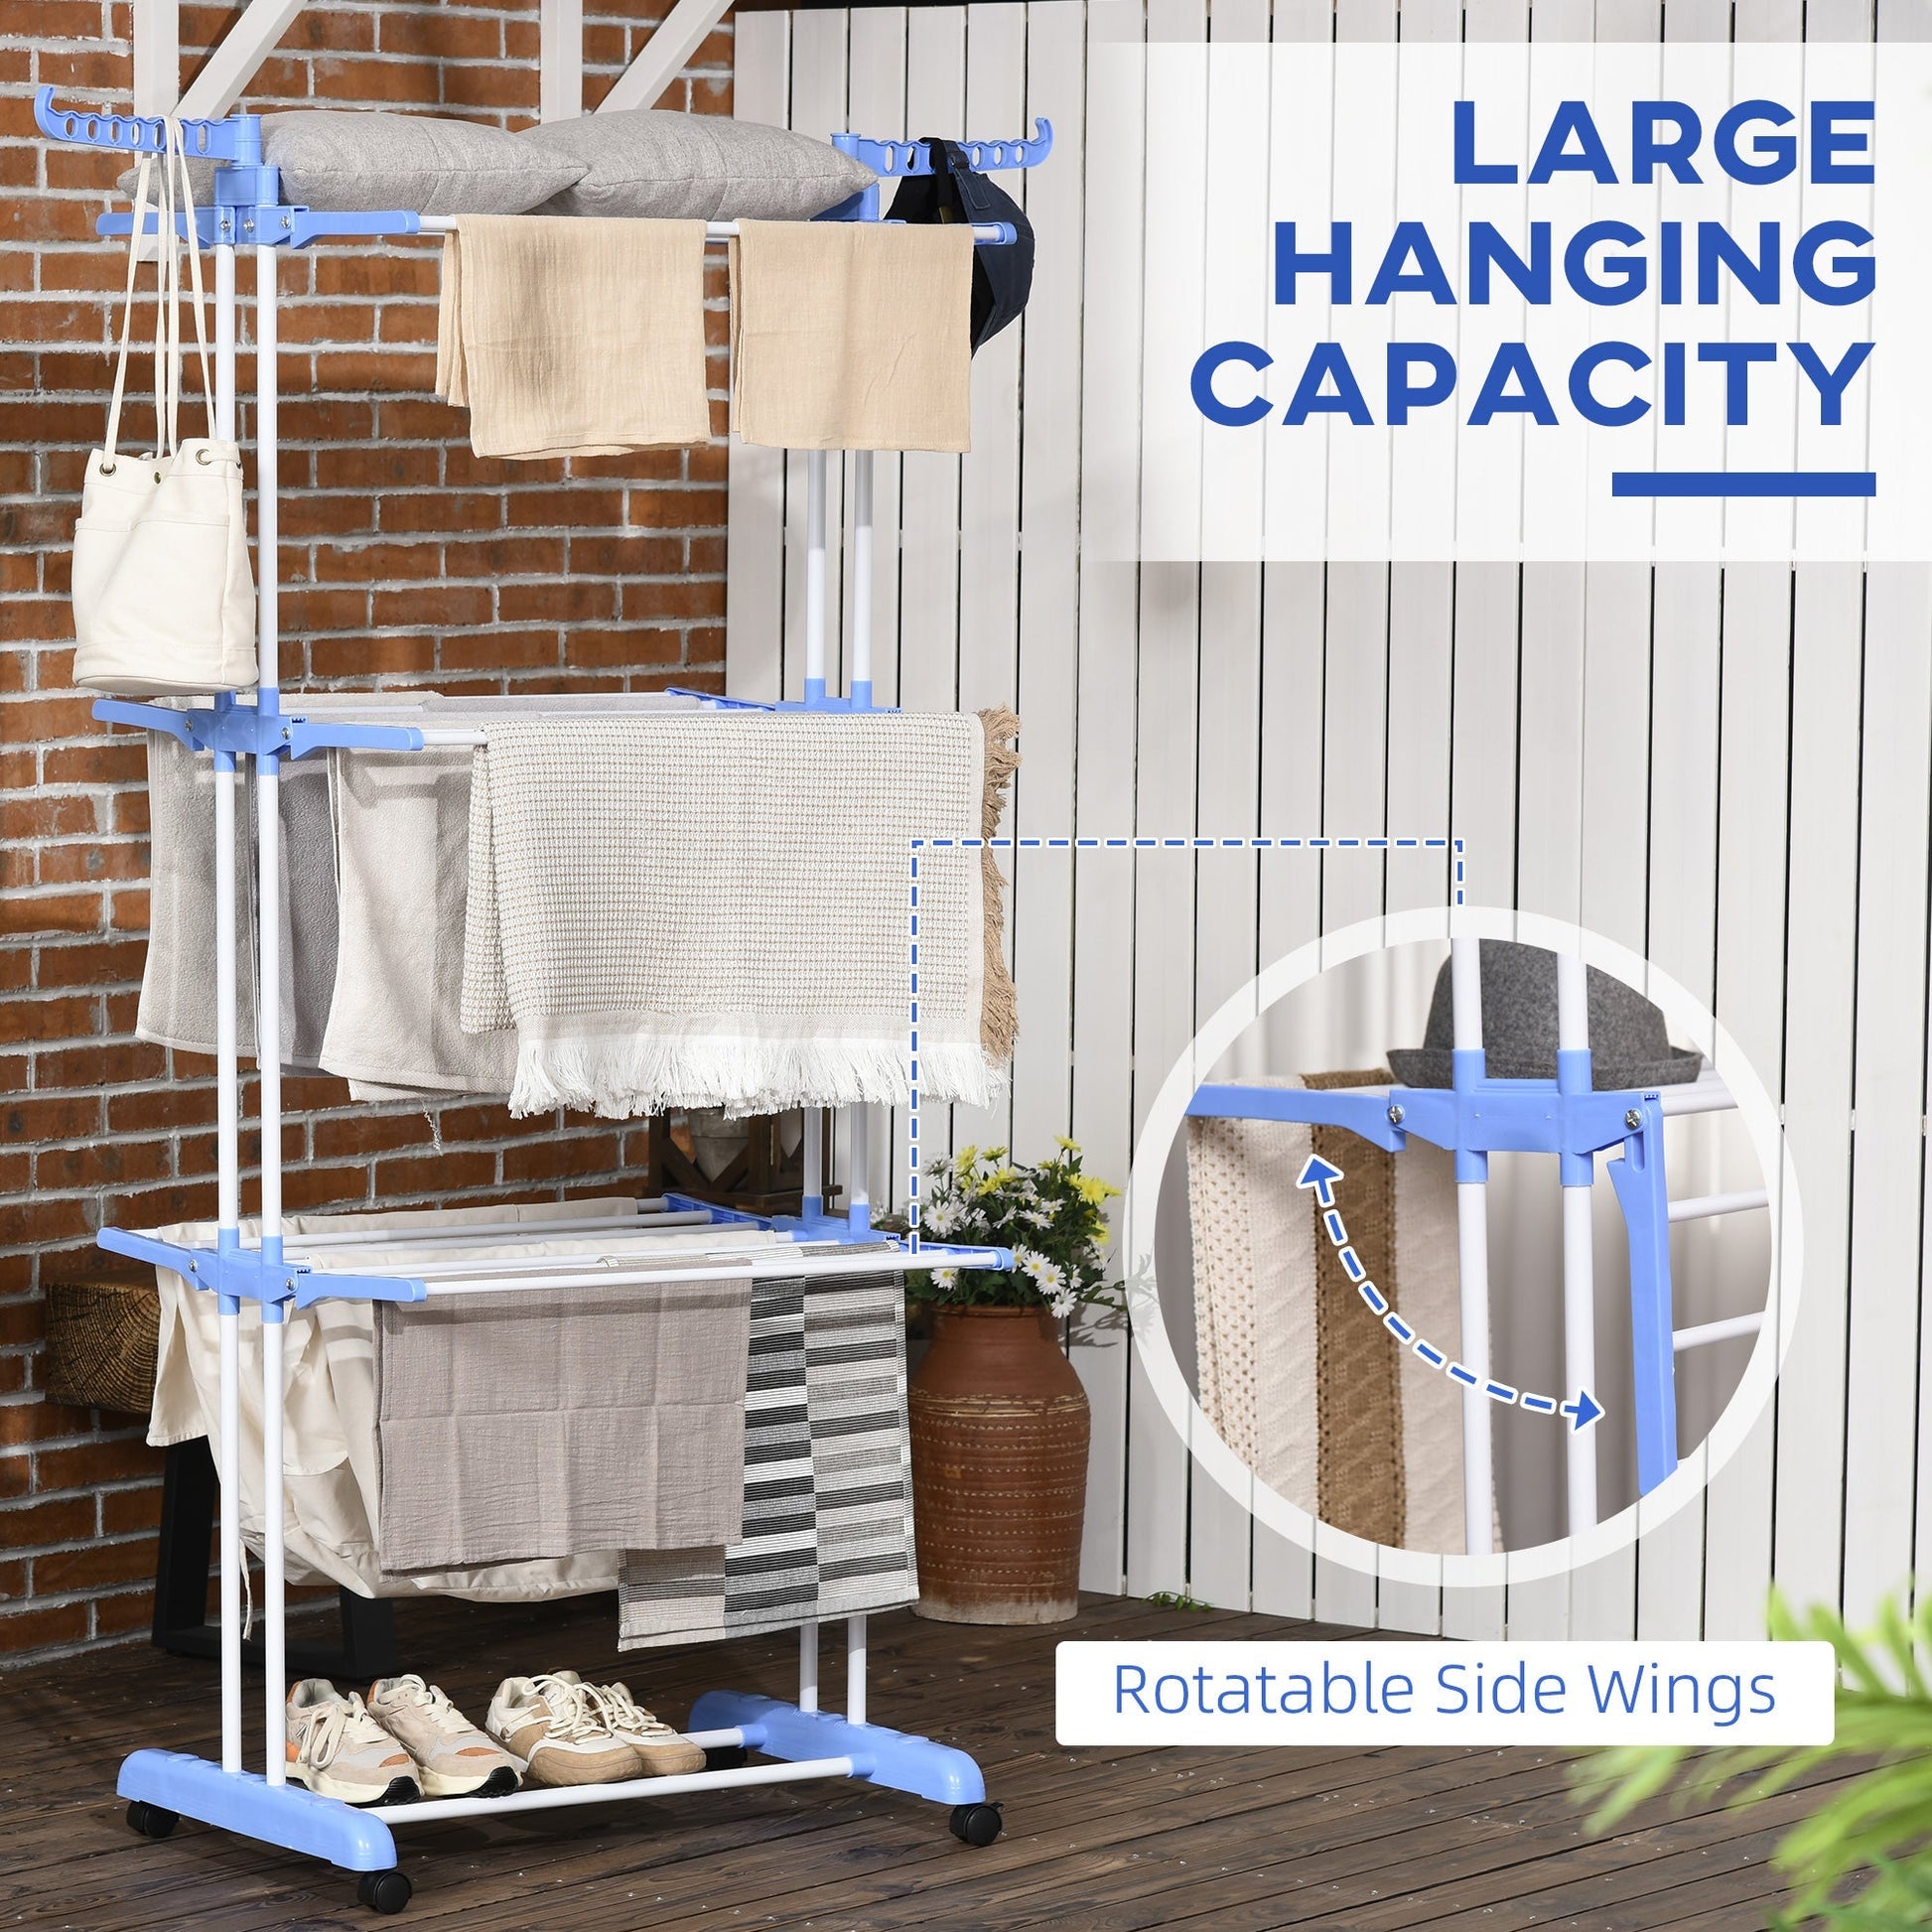 Foldable Clothes Drying Rack, 4-Tier Steel Laundry Racks for Drying Clothes with 2 Side Wings and 4 Castors, Indoor and Outdoor Use, Blue at Gallery Canada